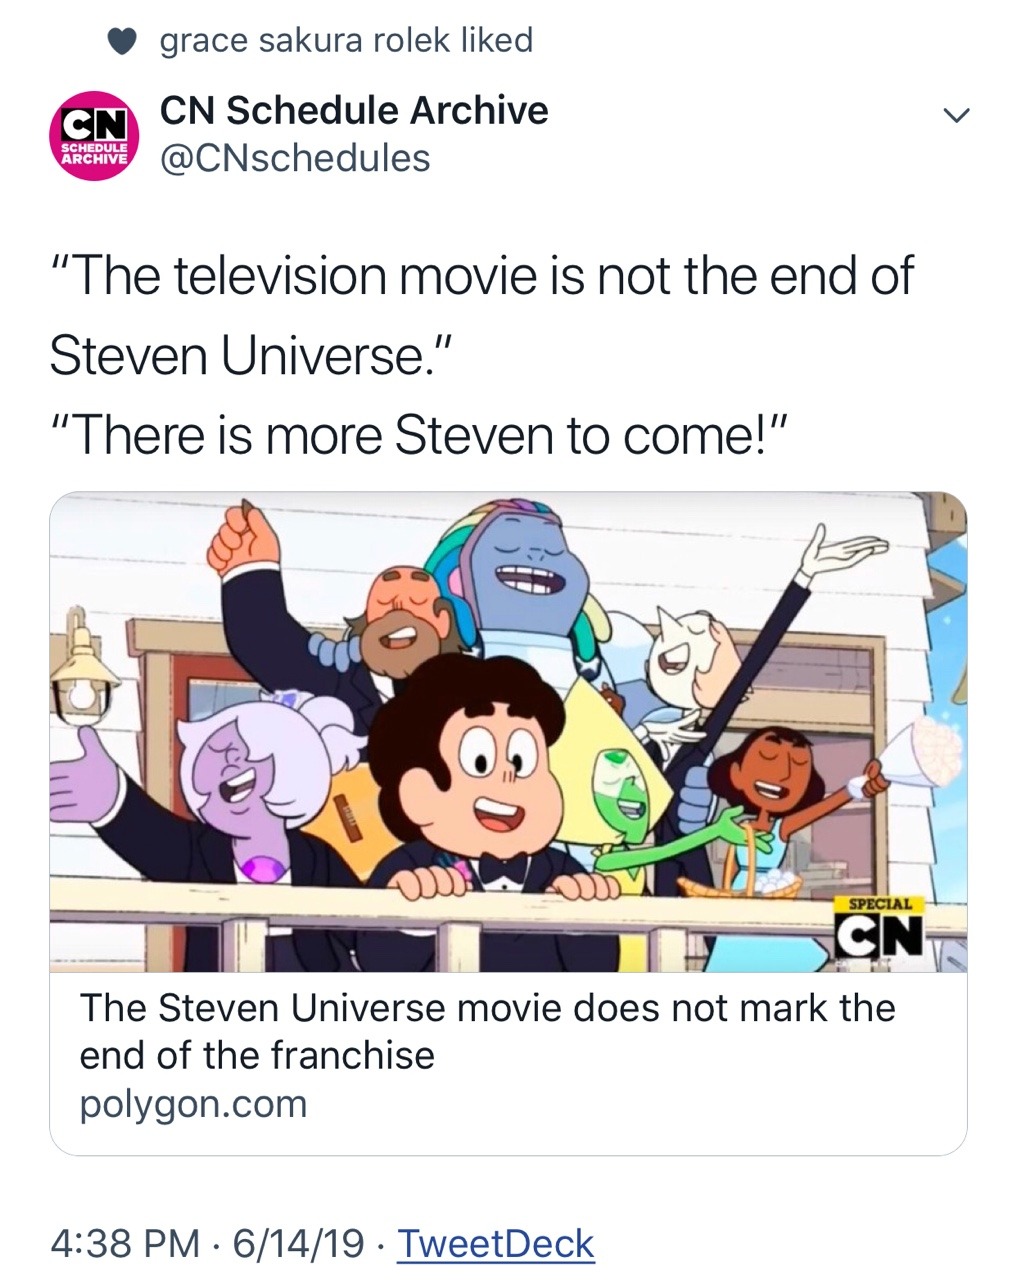 crewniverse-tweets:  It’s not over yet! There’s even more after the movie!Tweet  Is the laughing being Aquamarine a confirmed thing or is that just an assumption by Polygon?(Please don’t tell me if the source of the info is a leak, though!)